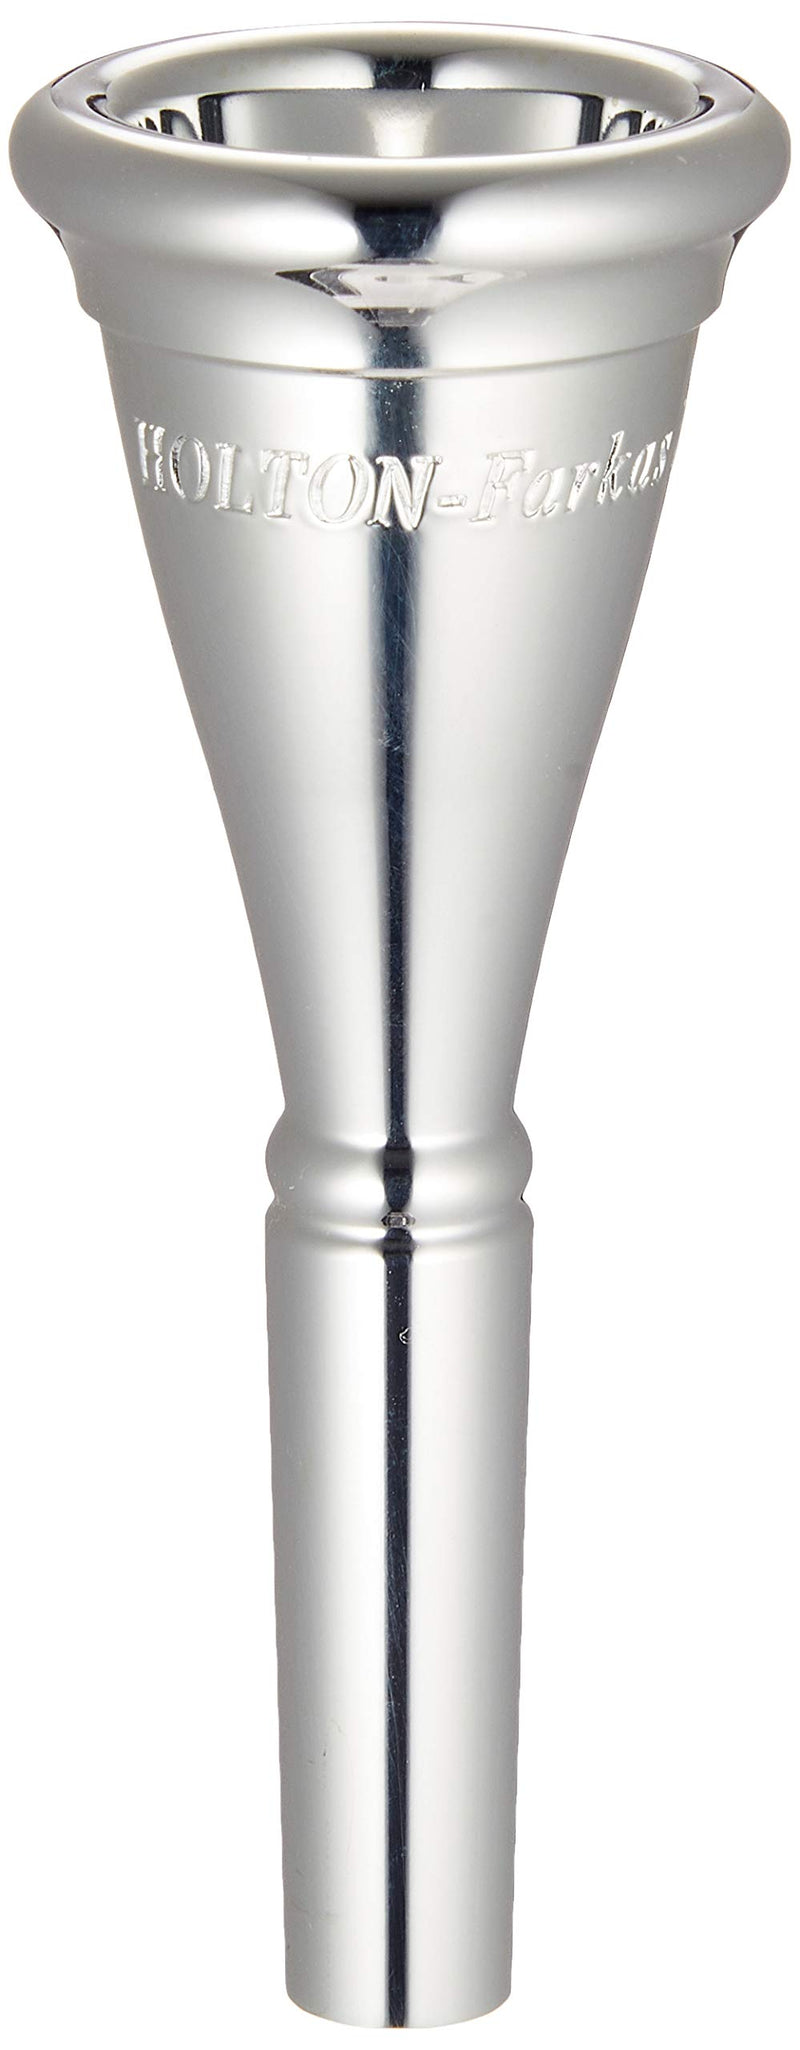 Holton Farkas French Horn Mouthpiece (H2850DC)